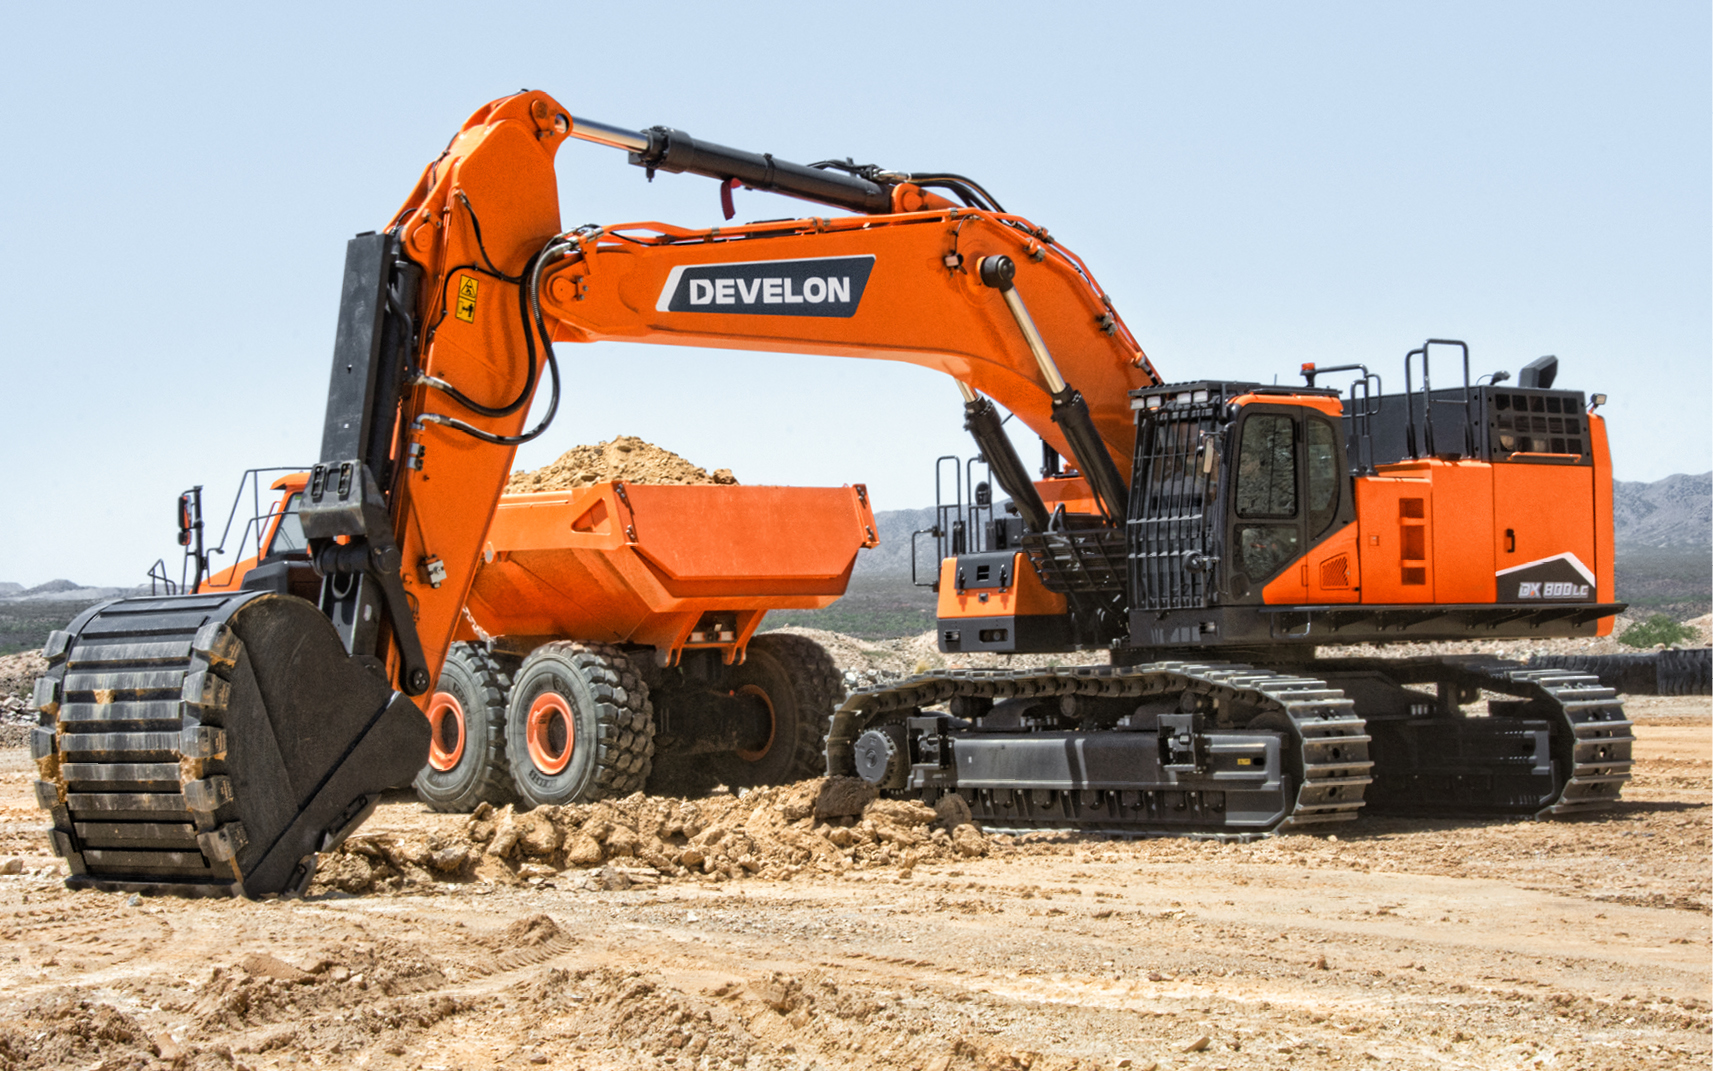 A DX800LC-7 crawler excavator getting ready to scoop with a bucket attachment.